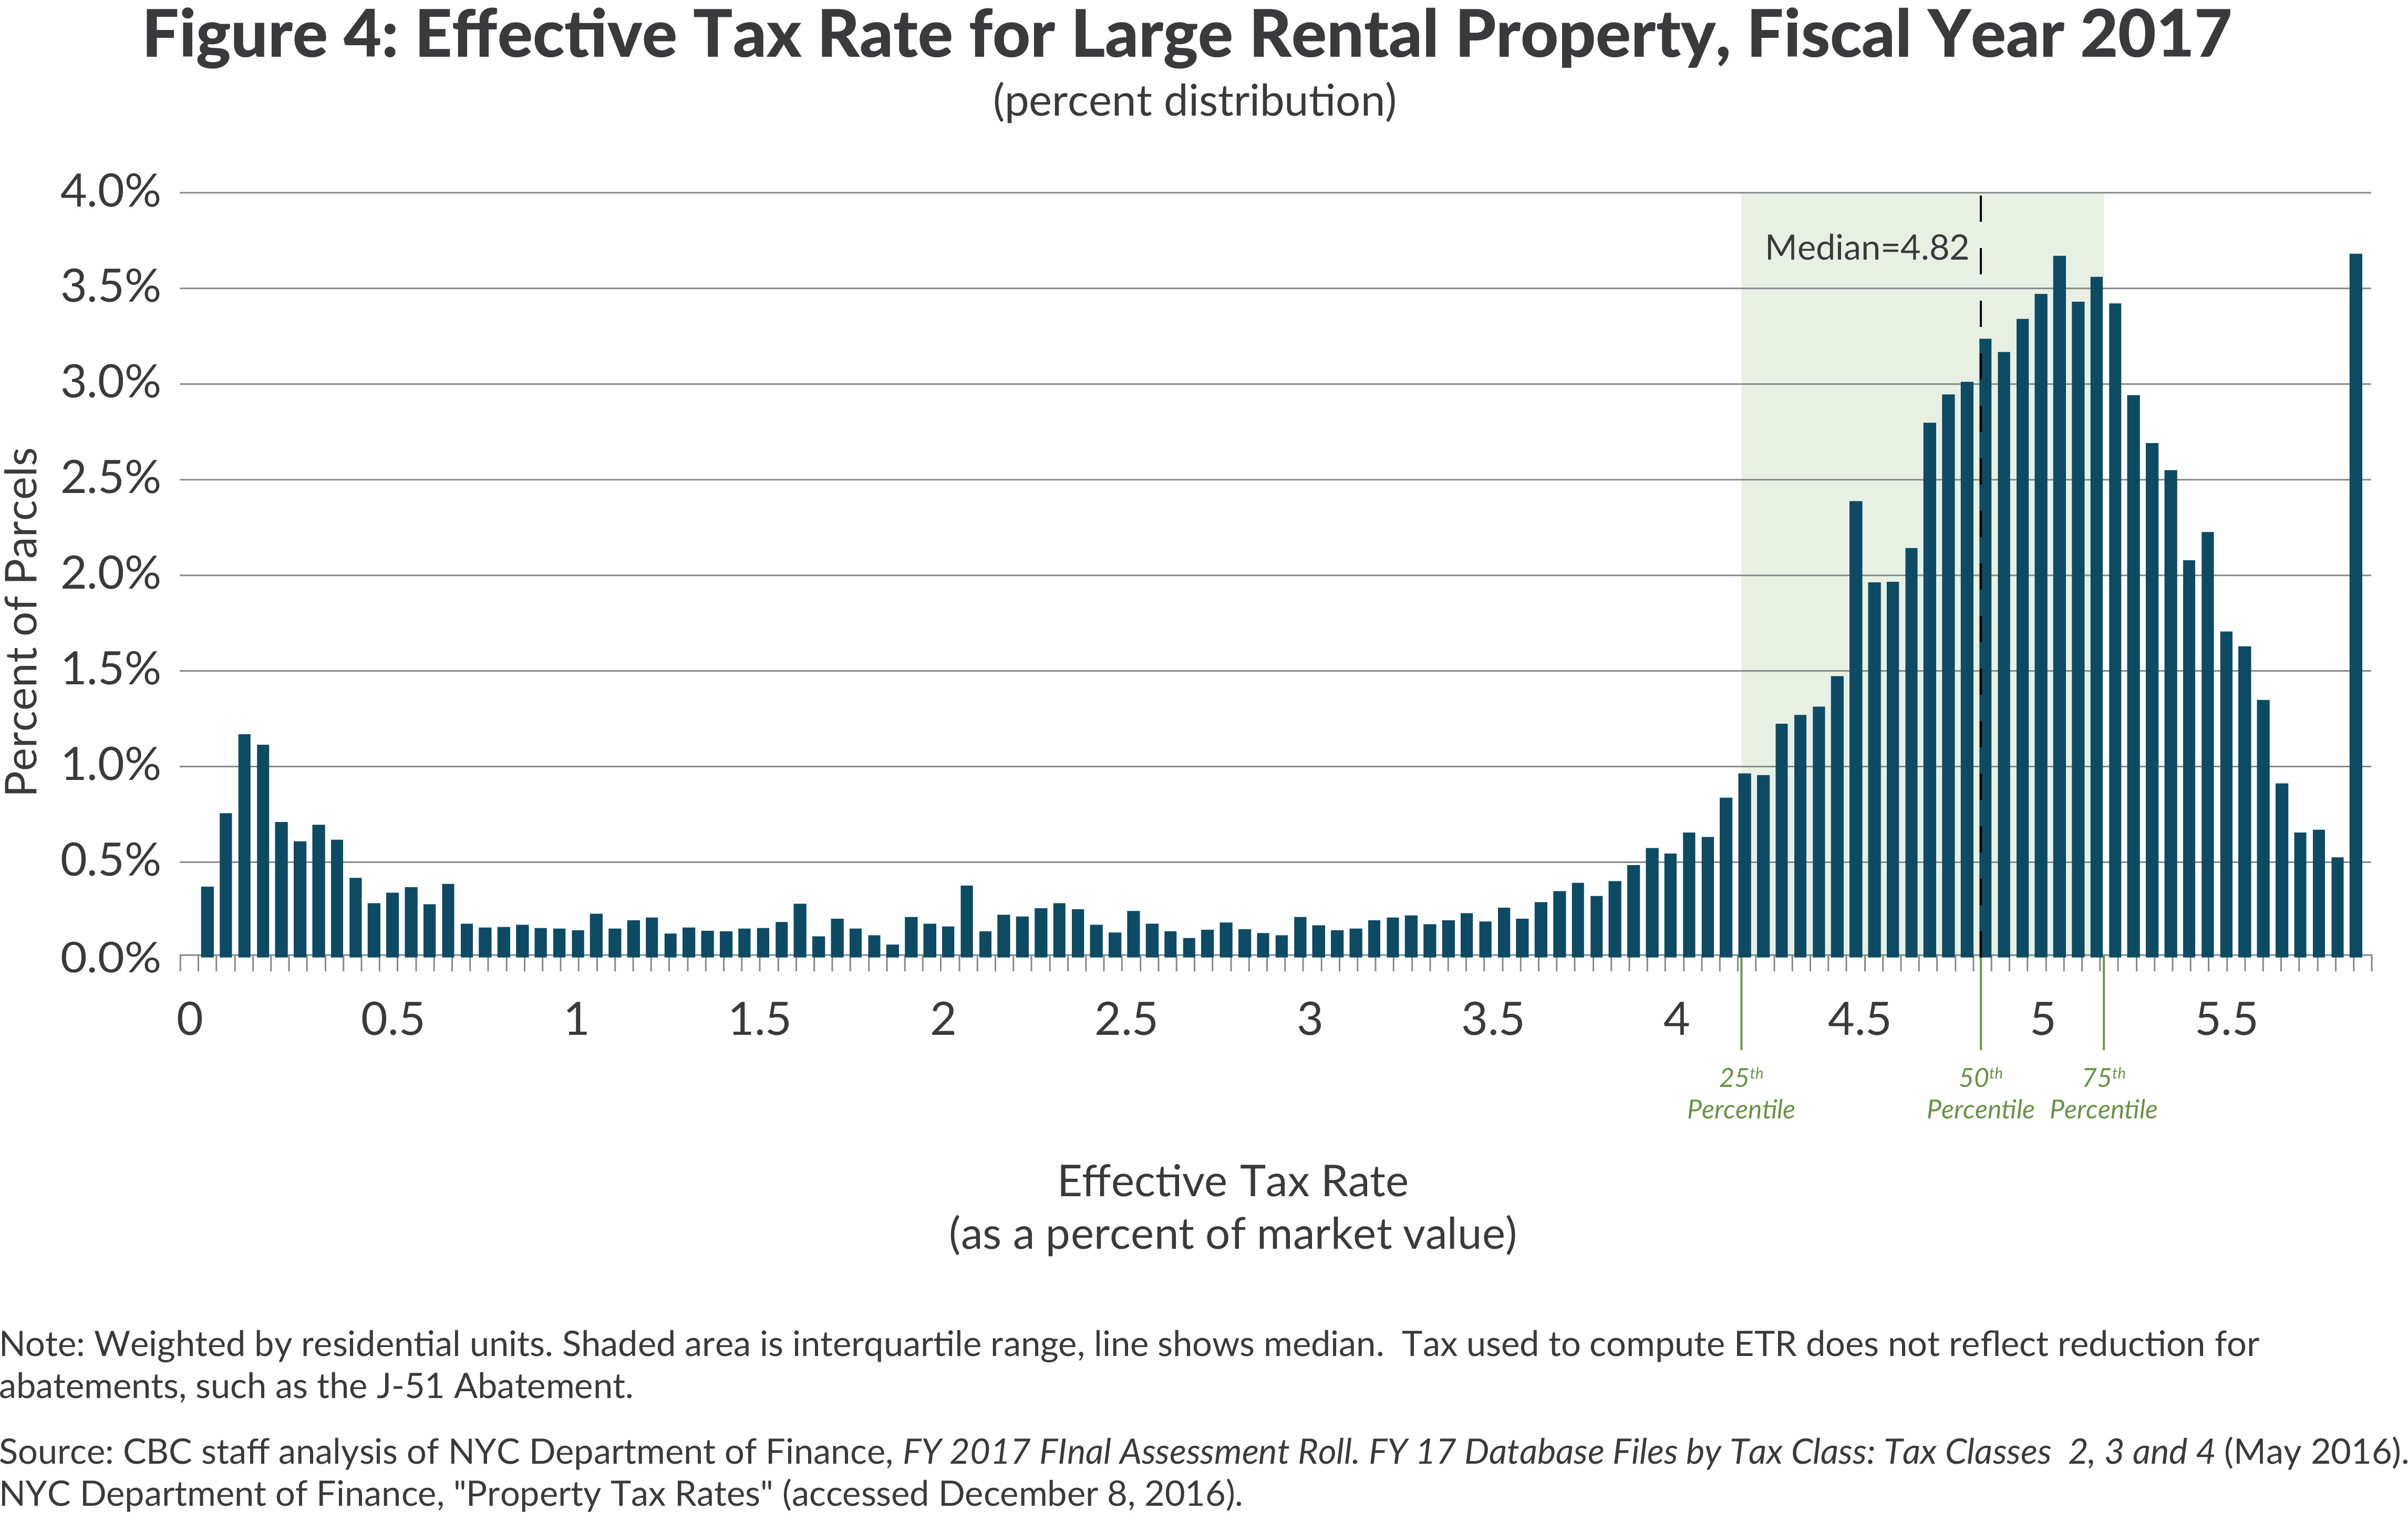 Effective tax rate distribution, NYC large rental buildings